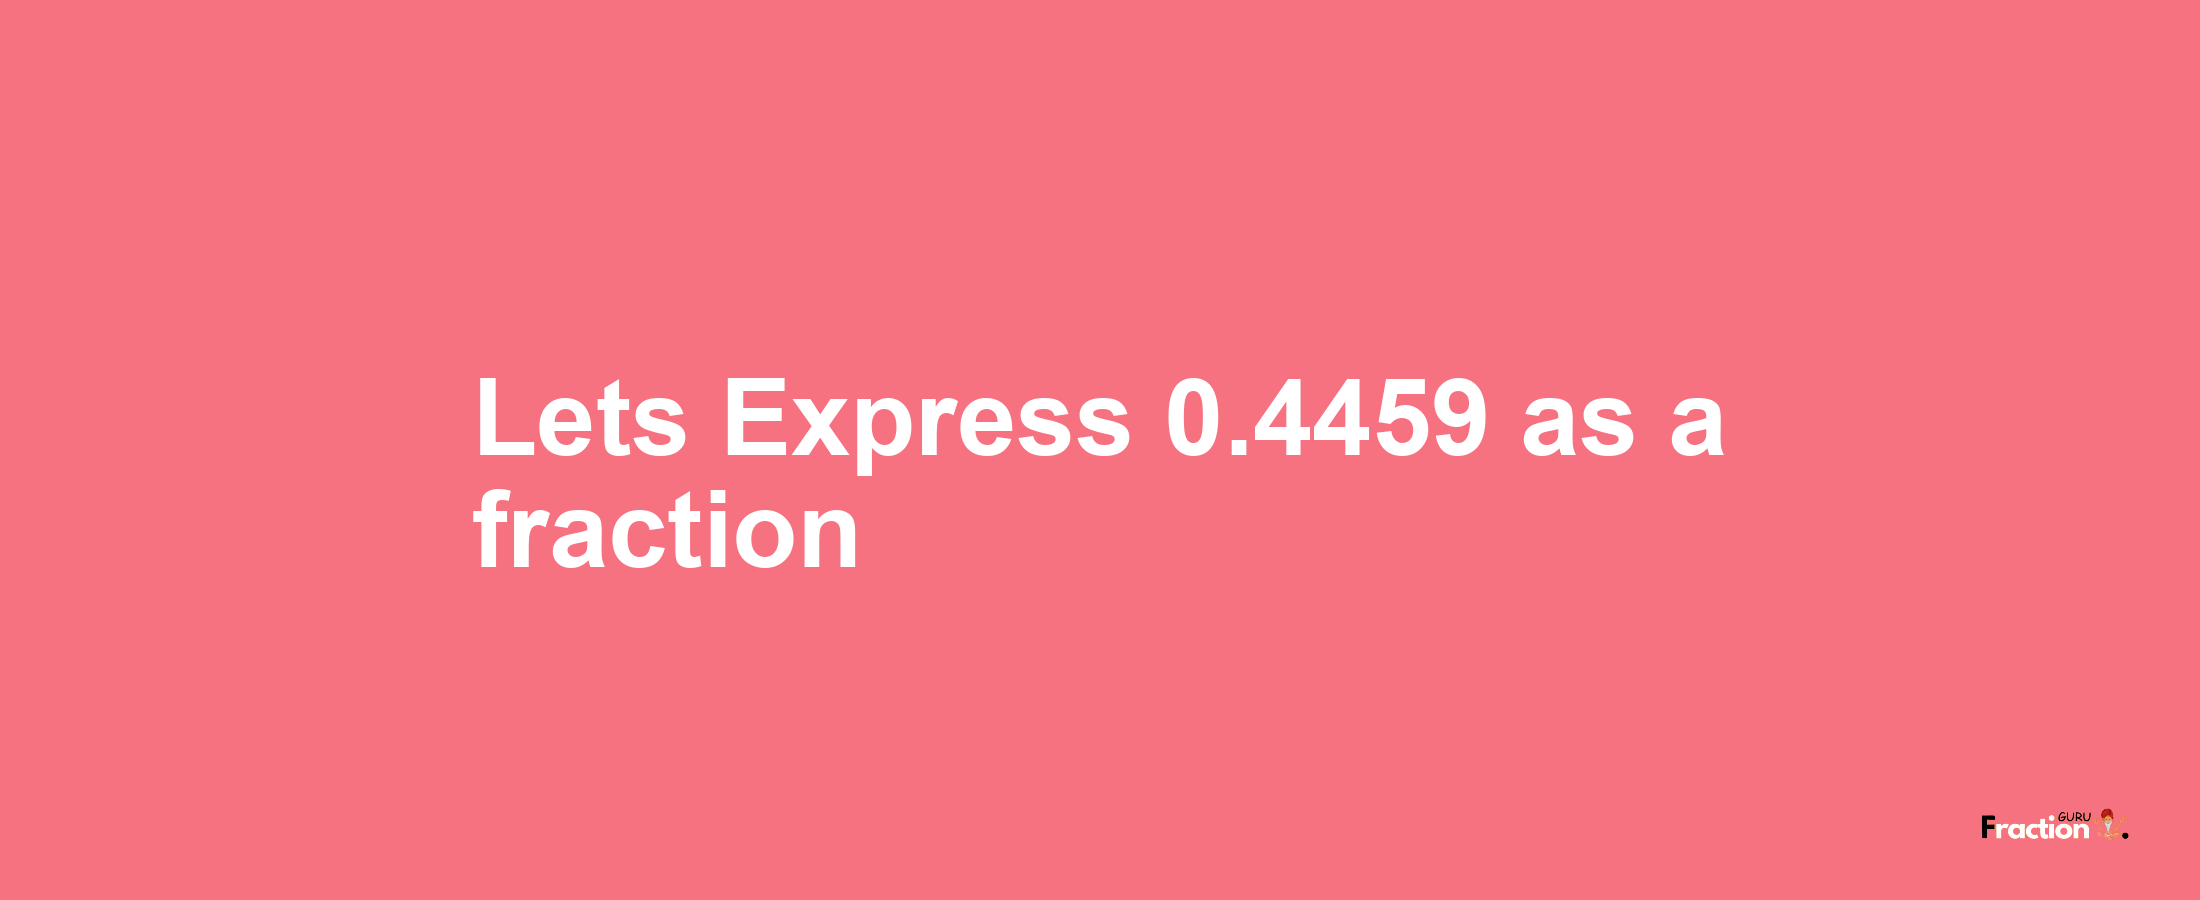 Lets Express 0.4459 as afraction